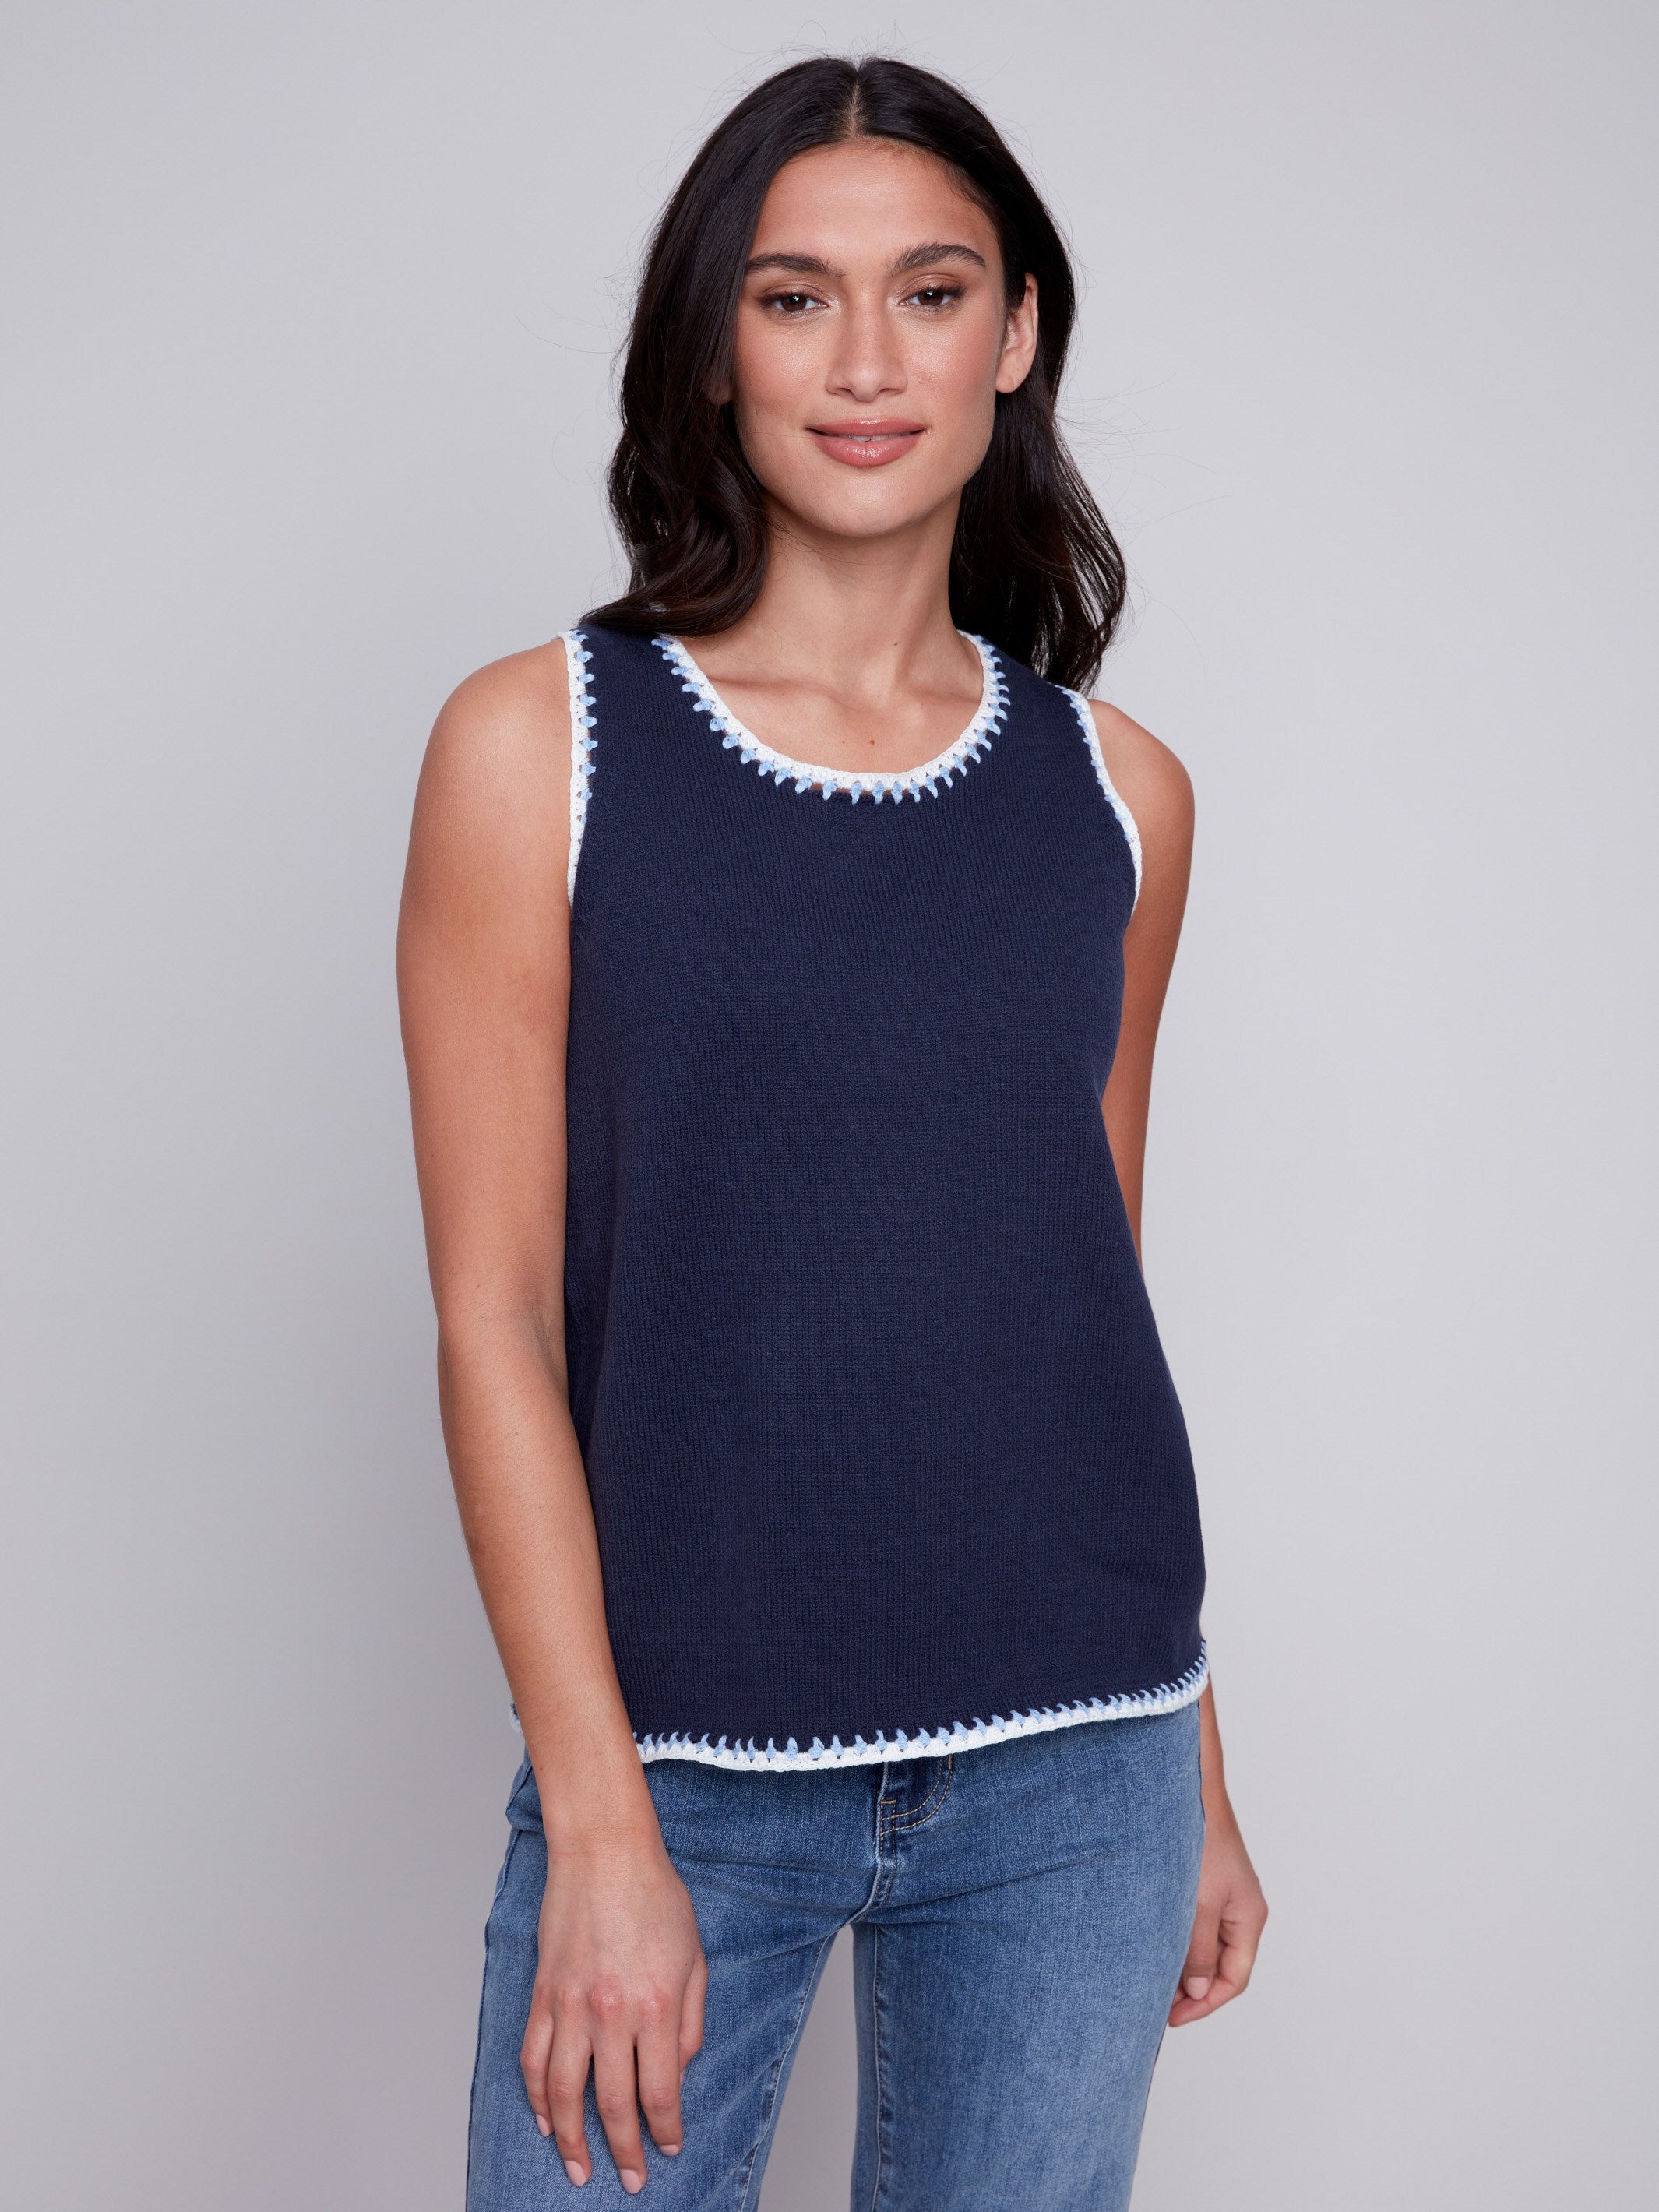 Charlie B Sleeveless Knit Top with Crochet Detail - Navy - Image 1